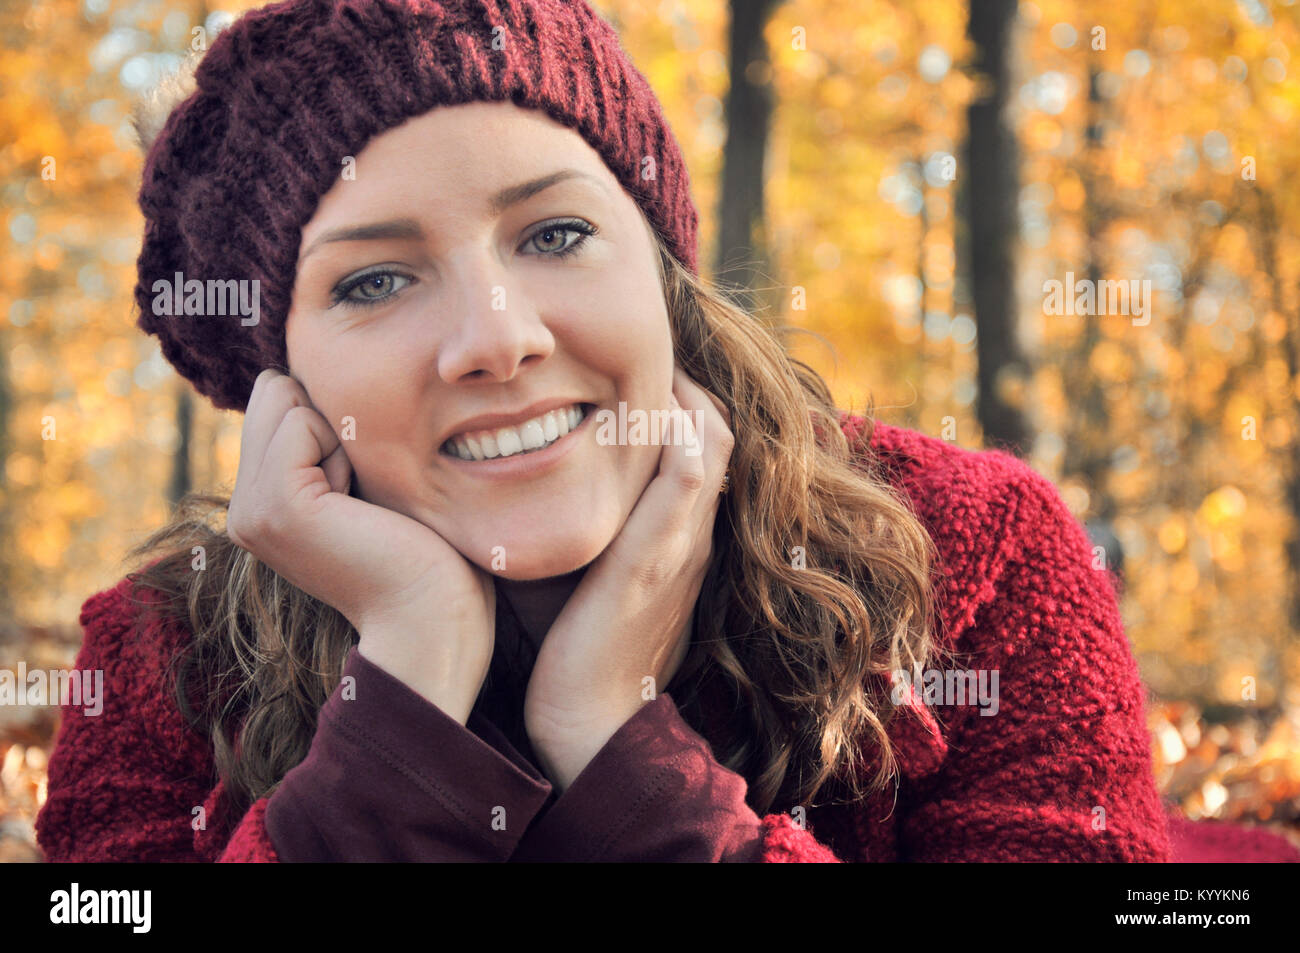 Portrait of smiling young adult woman Stock Photo